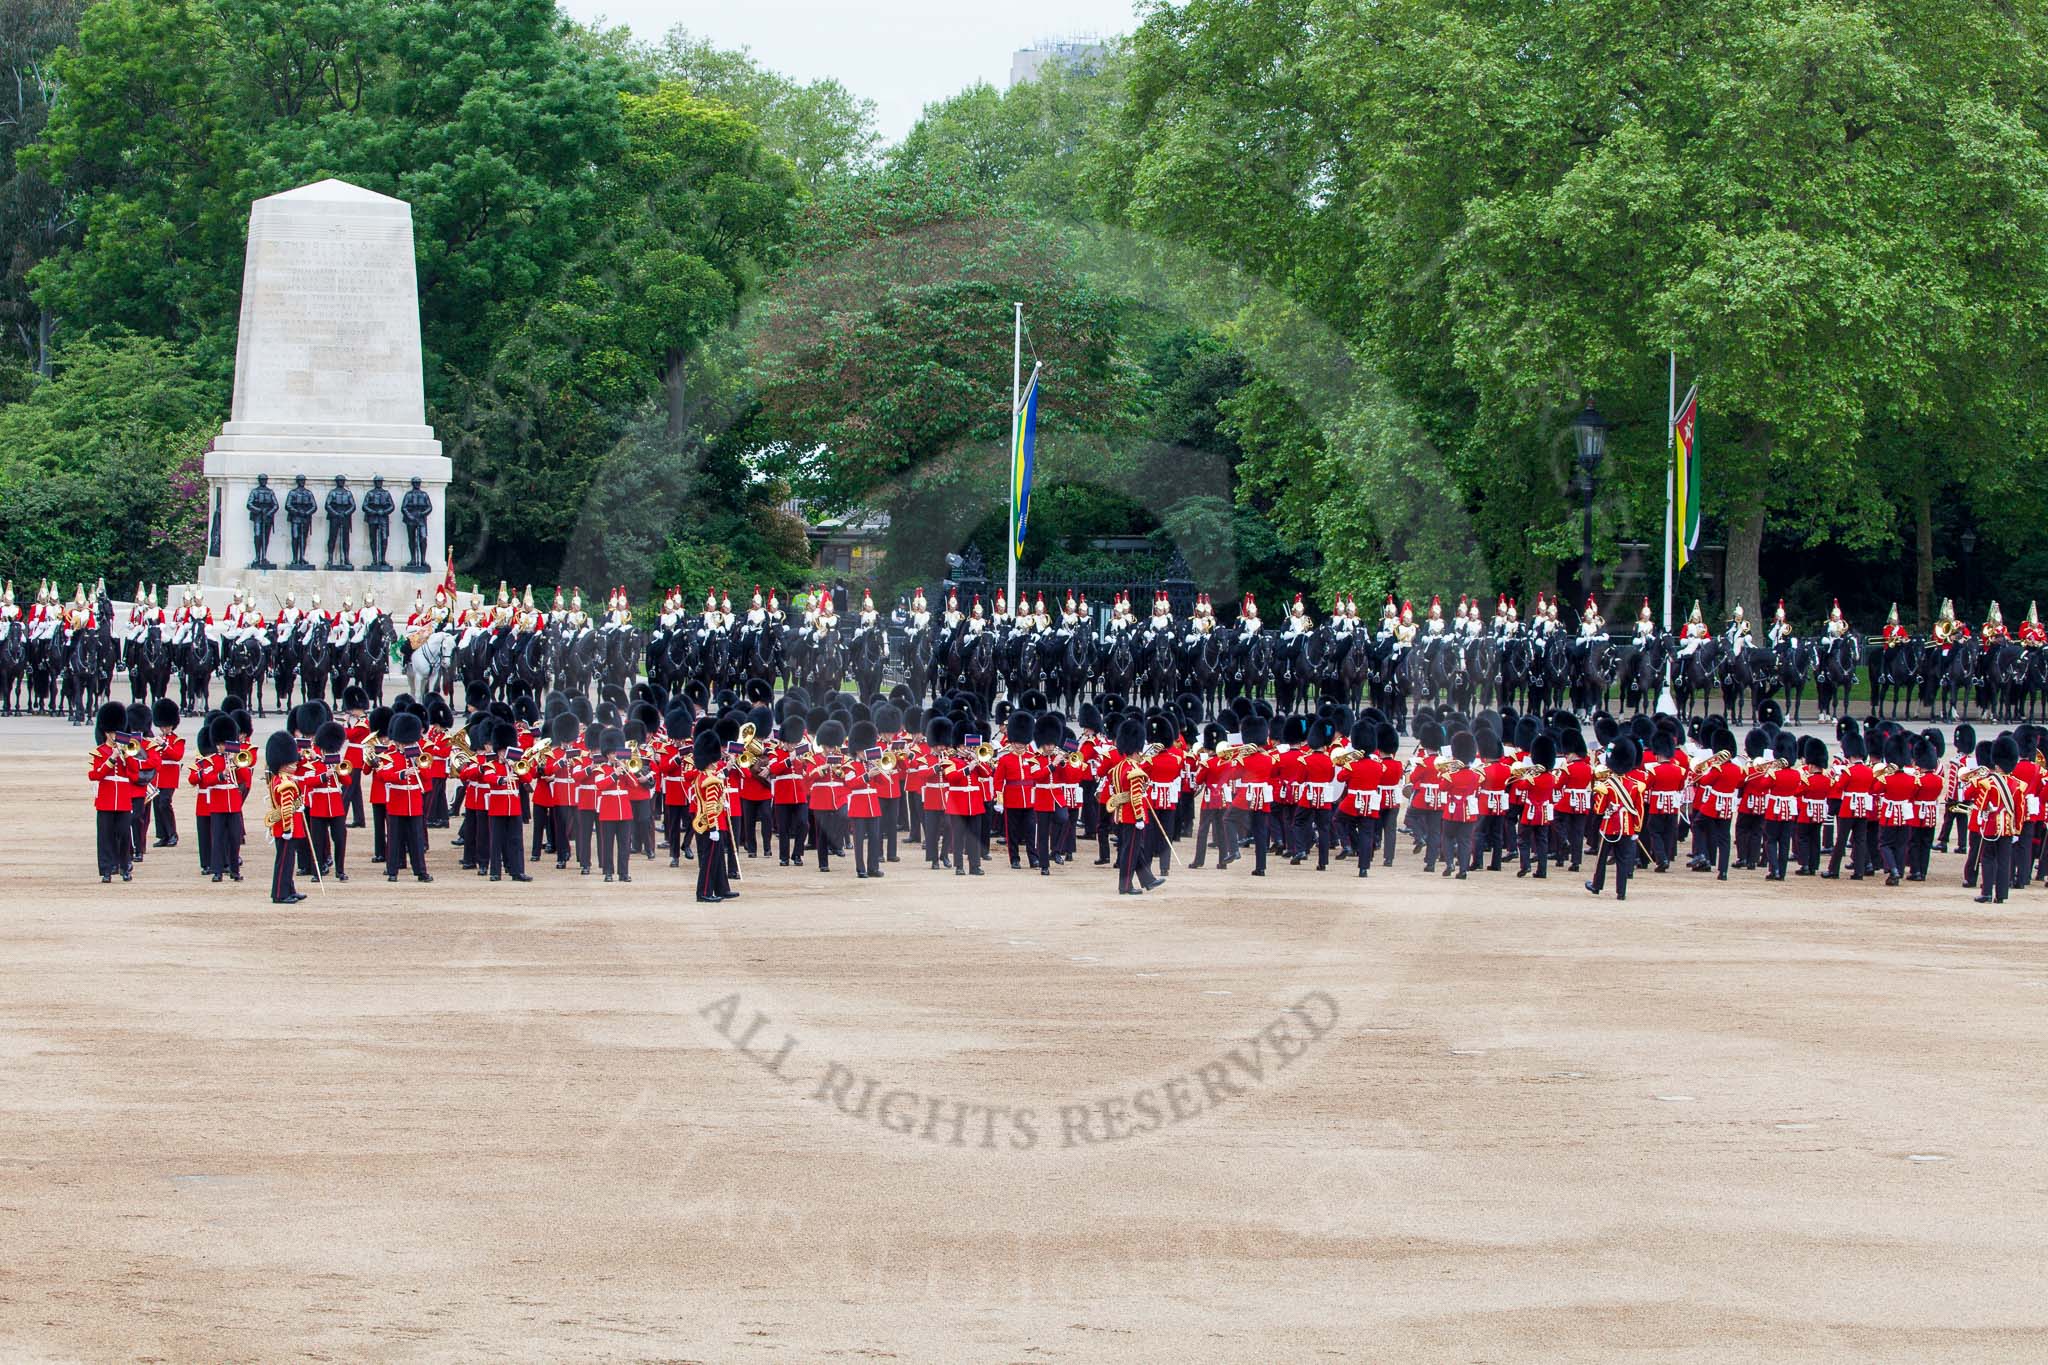 Major General's Review 2013: Massed Bands Troop during March Past in Slow Time..
Horse Guards Parade, Westminster,
London SW1,

United Kingdom,
on 01 June 2013 at 11:32, image #474